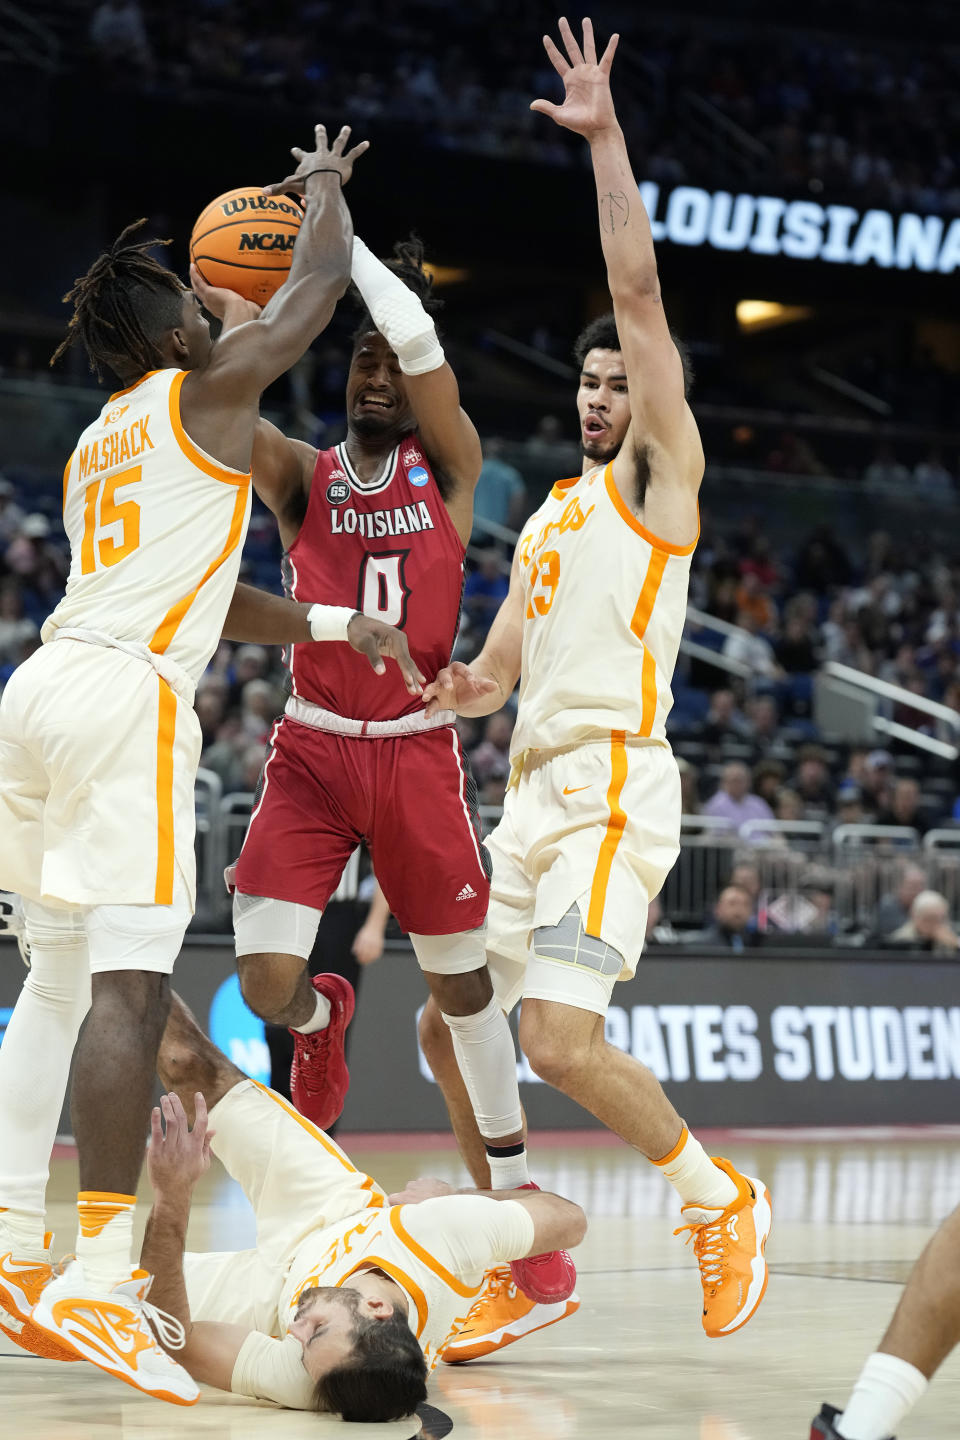 Louisiana guard Themus Fulks (0) shoots against Tennessee guard Jahmai Mashack (15), forward Olivier Nkamhoua (13) and guard Santiago Vescovi, bottom, during the first half of a first-round college basketball game in the NCAA Tournament Thursday, March 16, 2023, in Orlando, Fla. (AP Photo/Chris O'Meara)